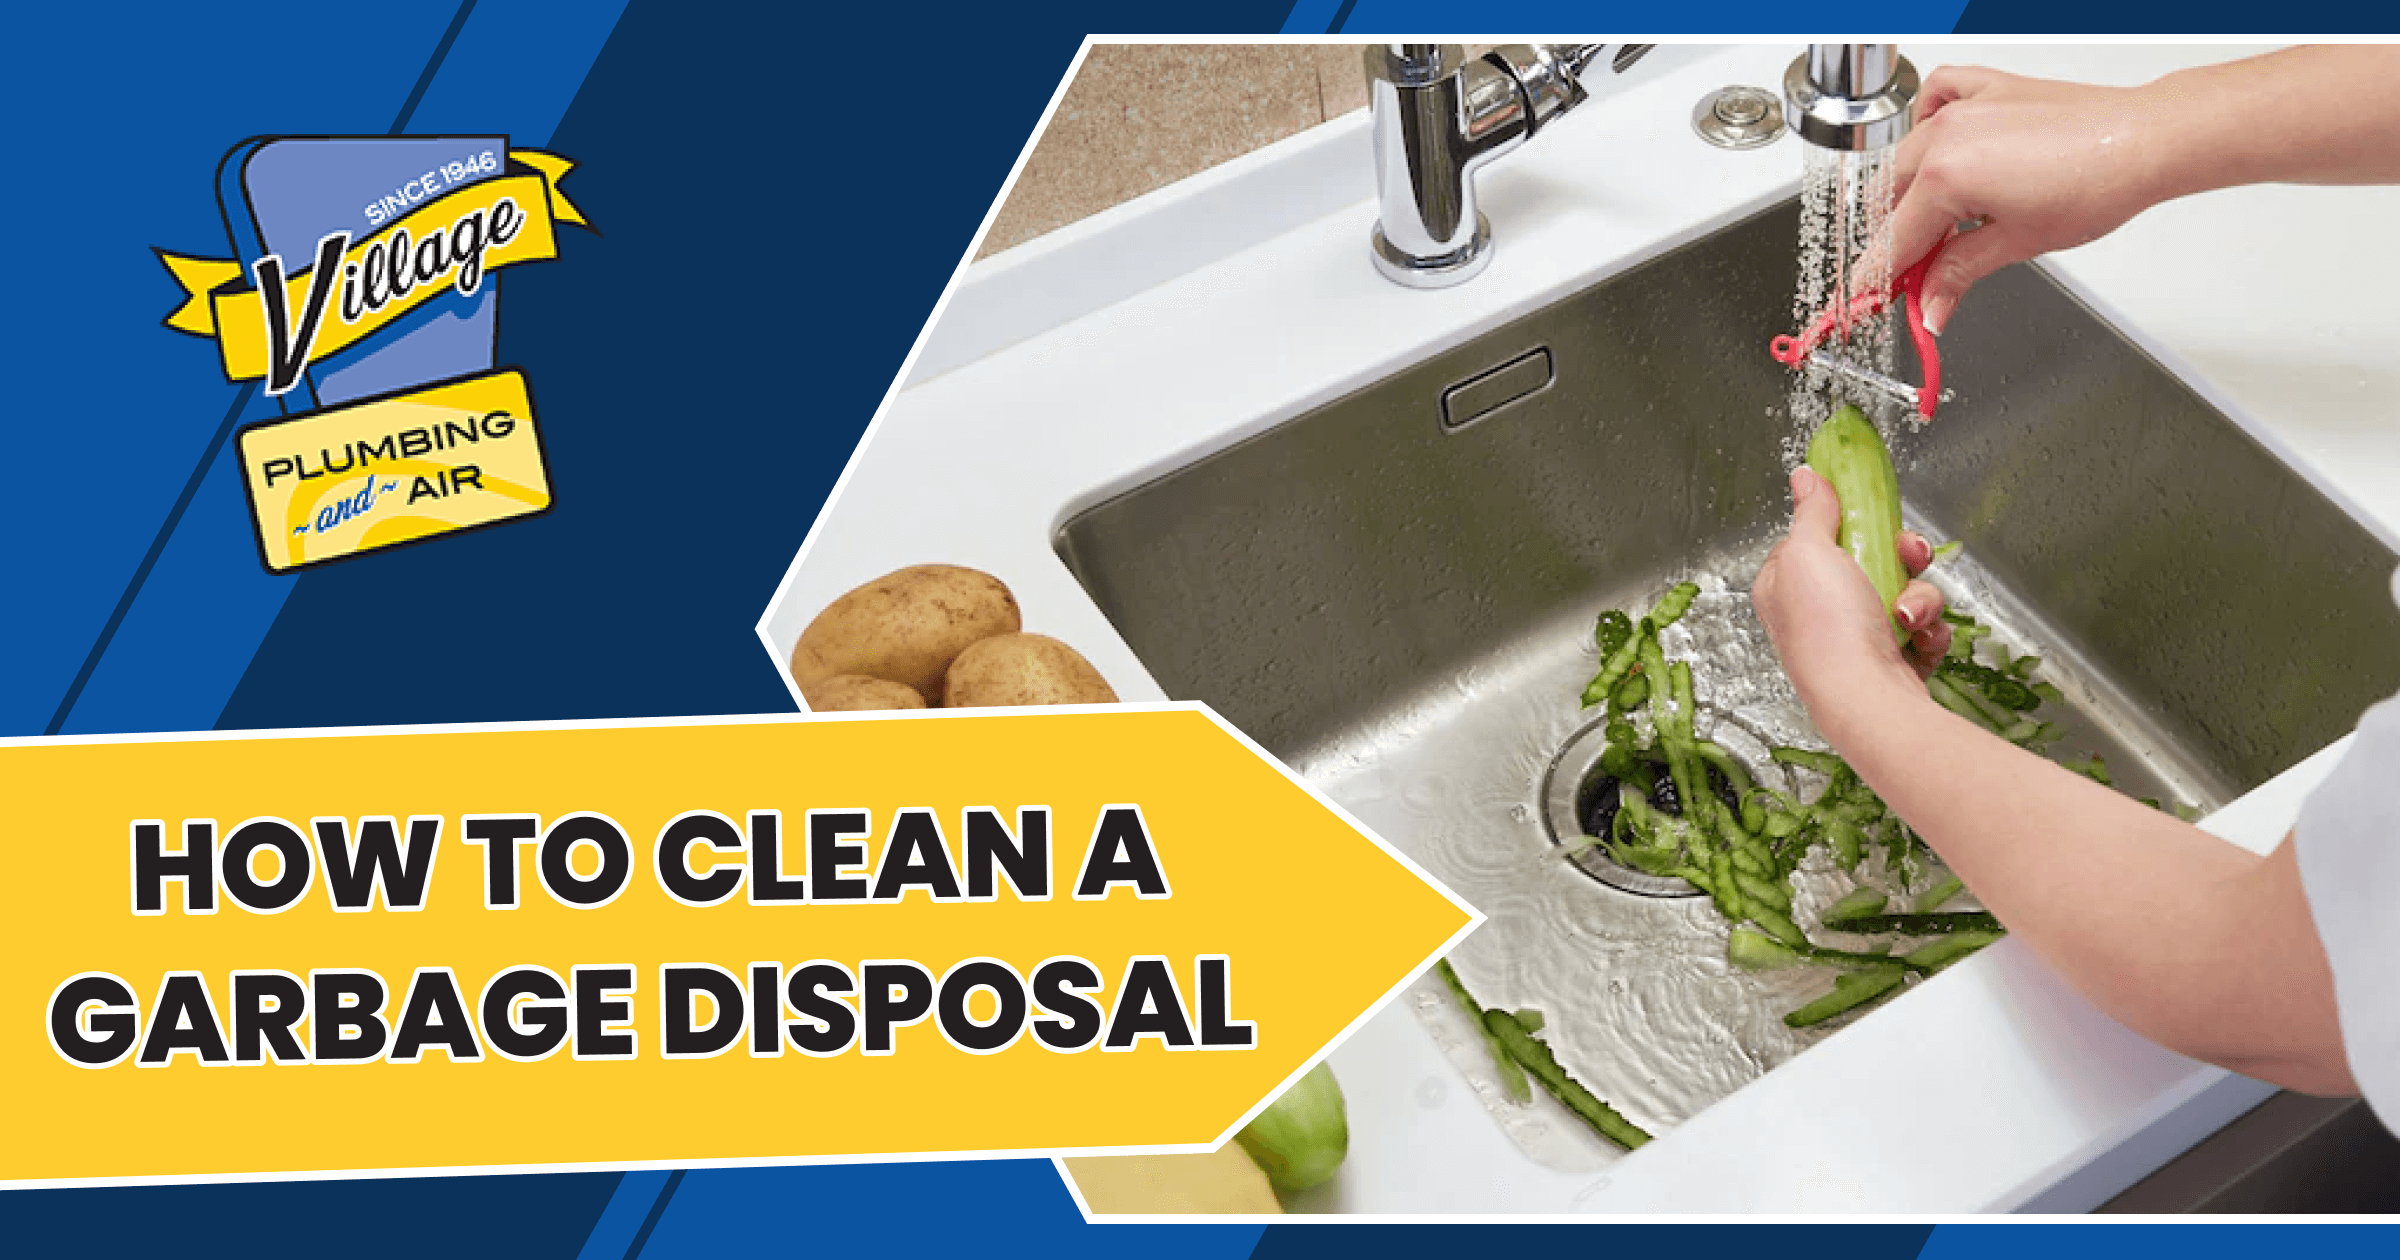 How To Clean A Garbage Disposal